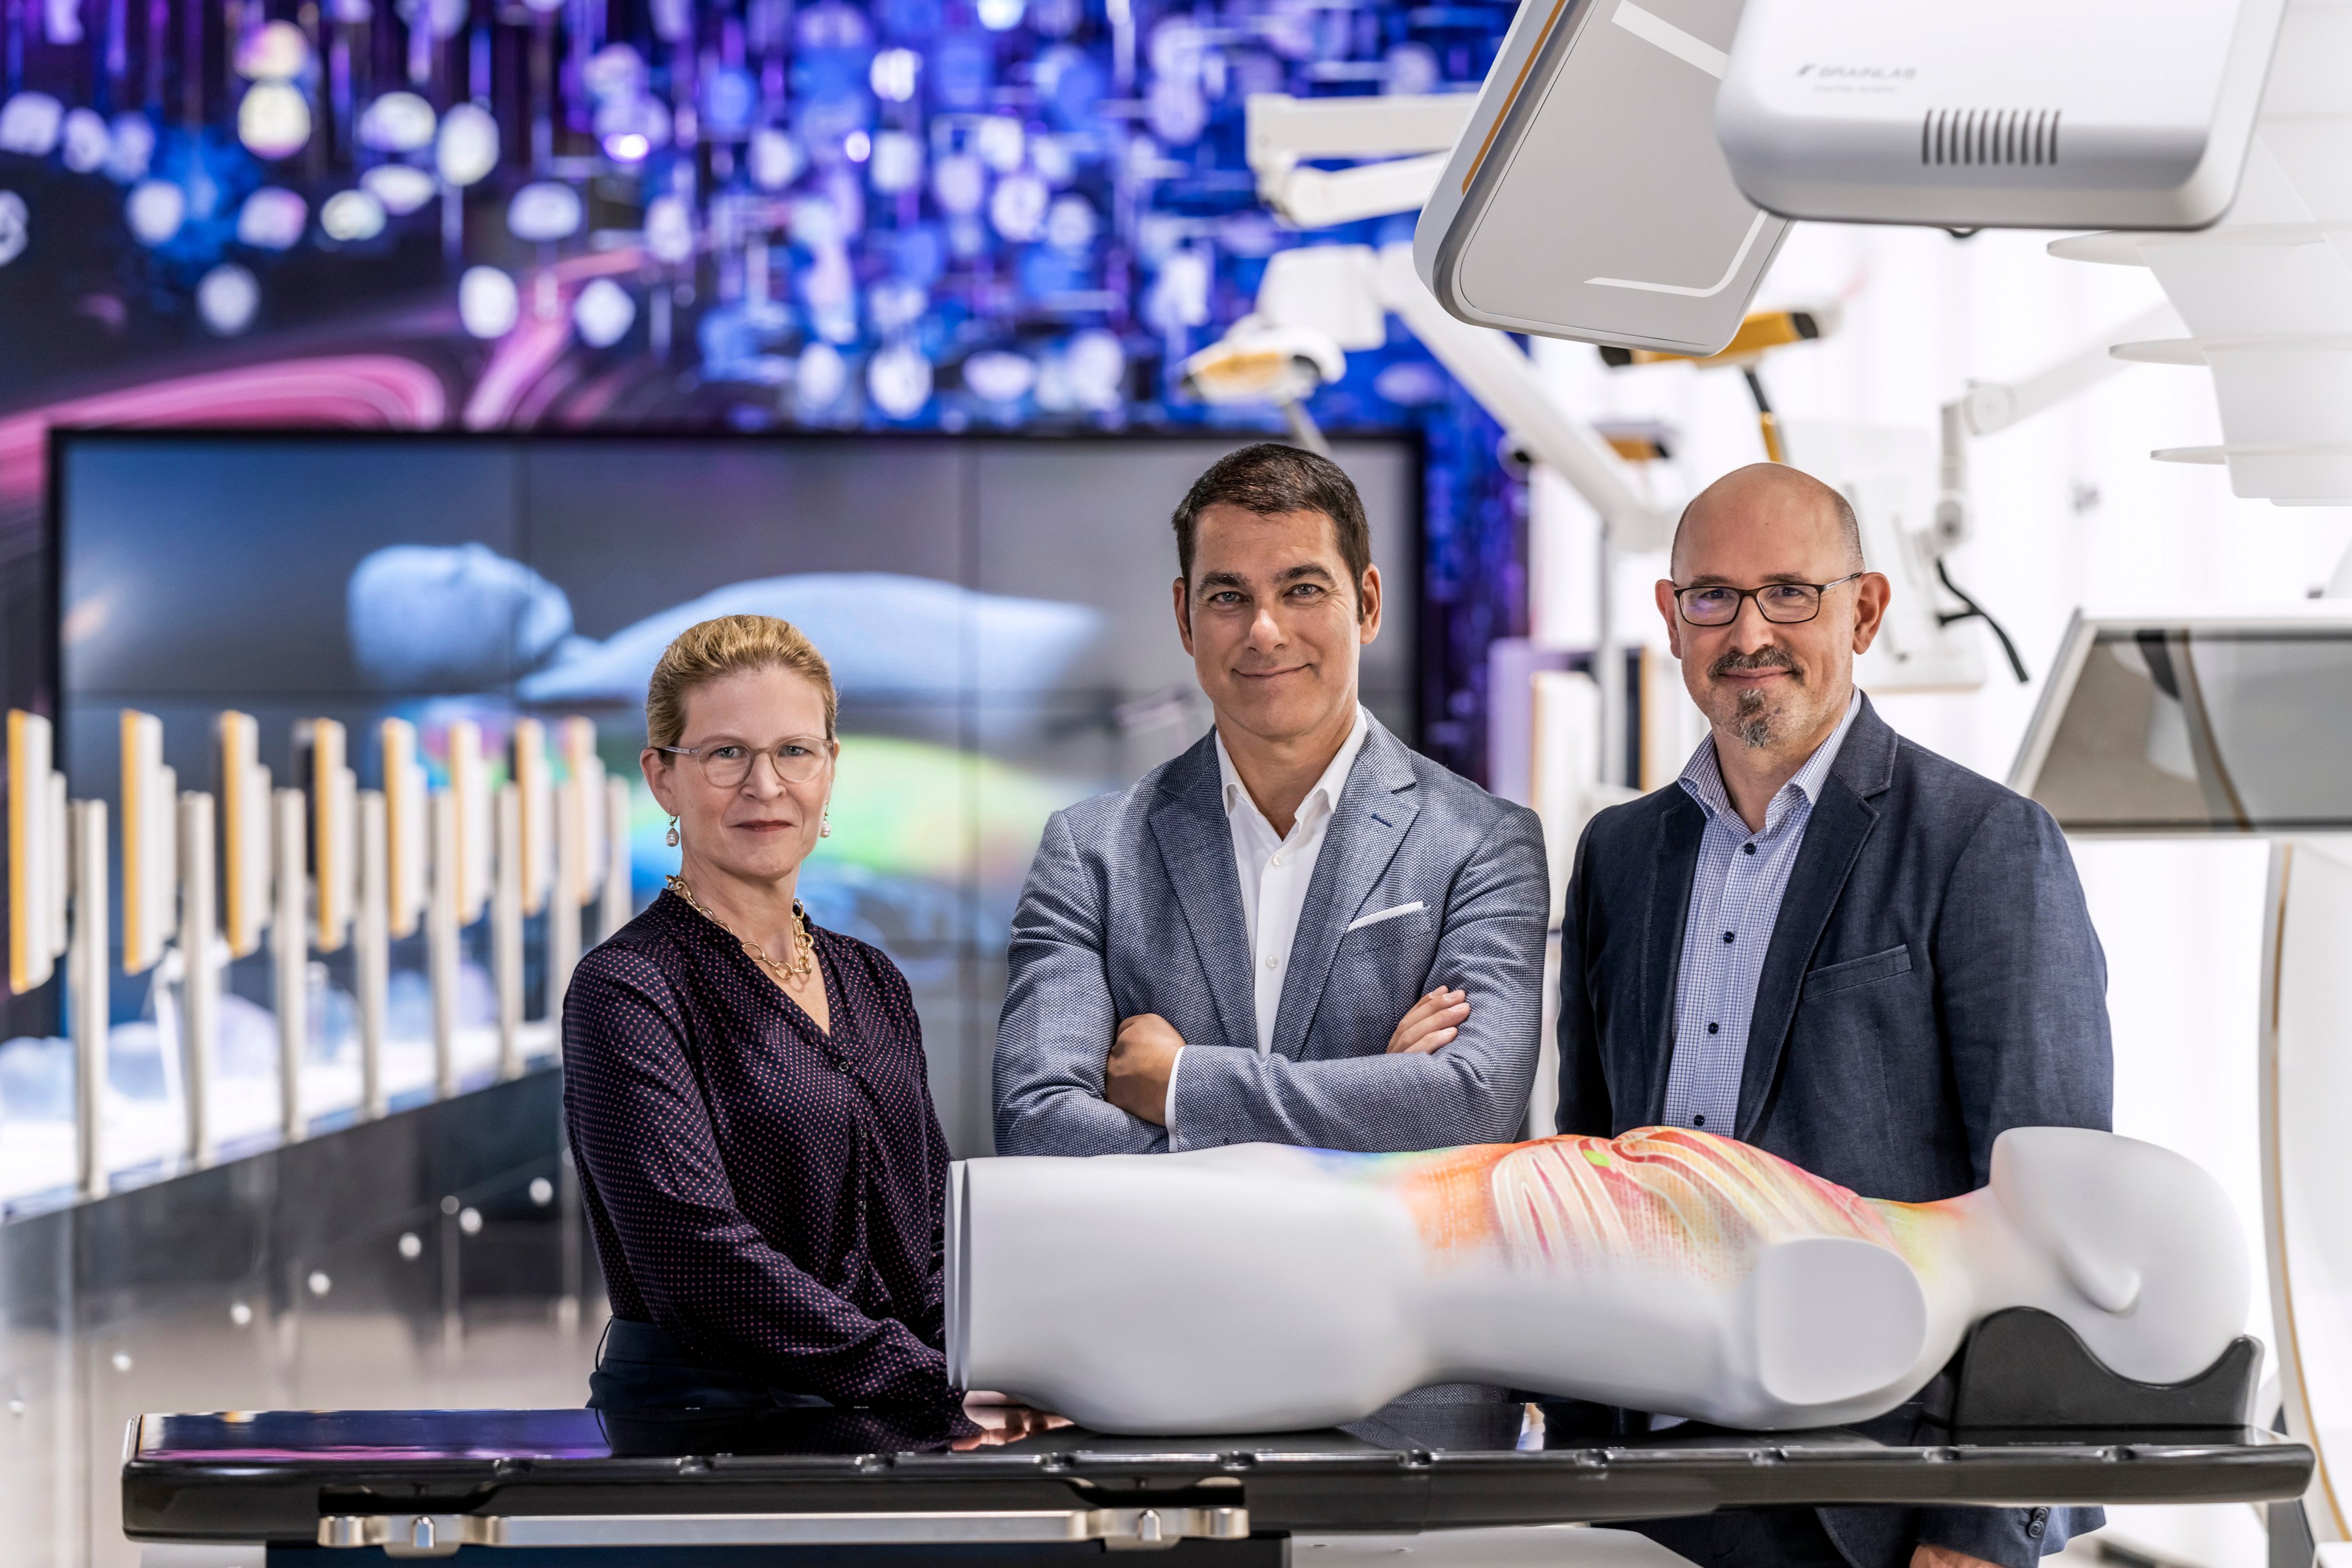 Stefan Vilsmeier, Claus Promberger and Professor Cordula Petersen, MD - Nominees or the Federal President’s Award for Innovation and Technology 2022